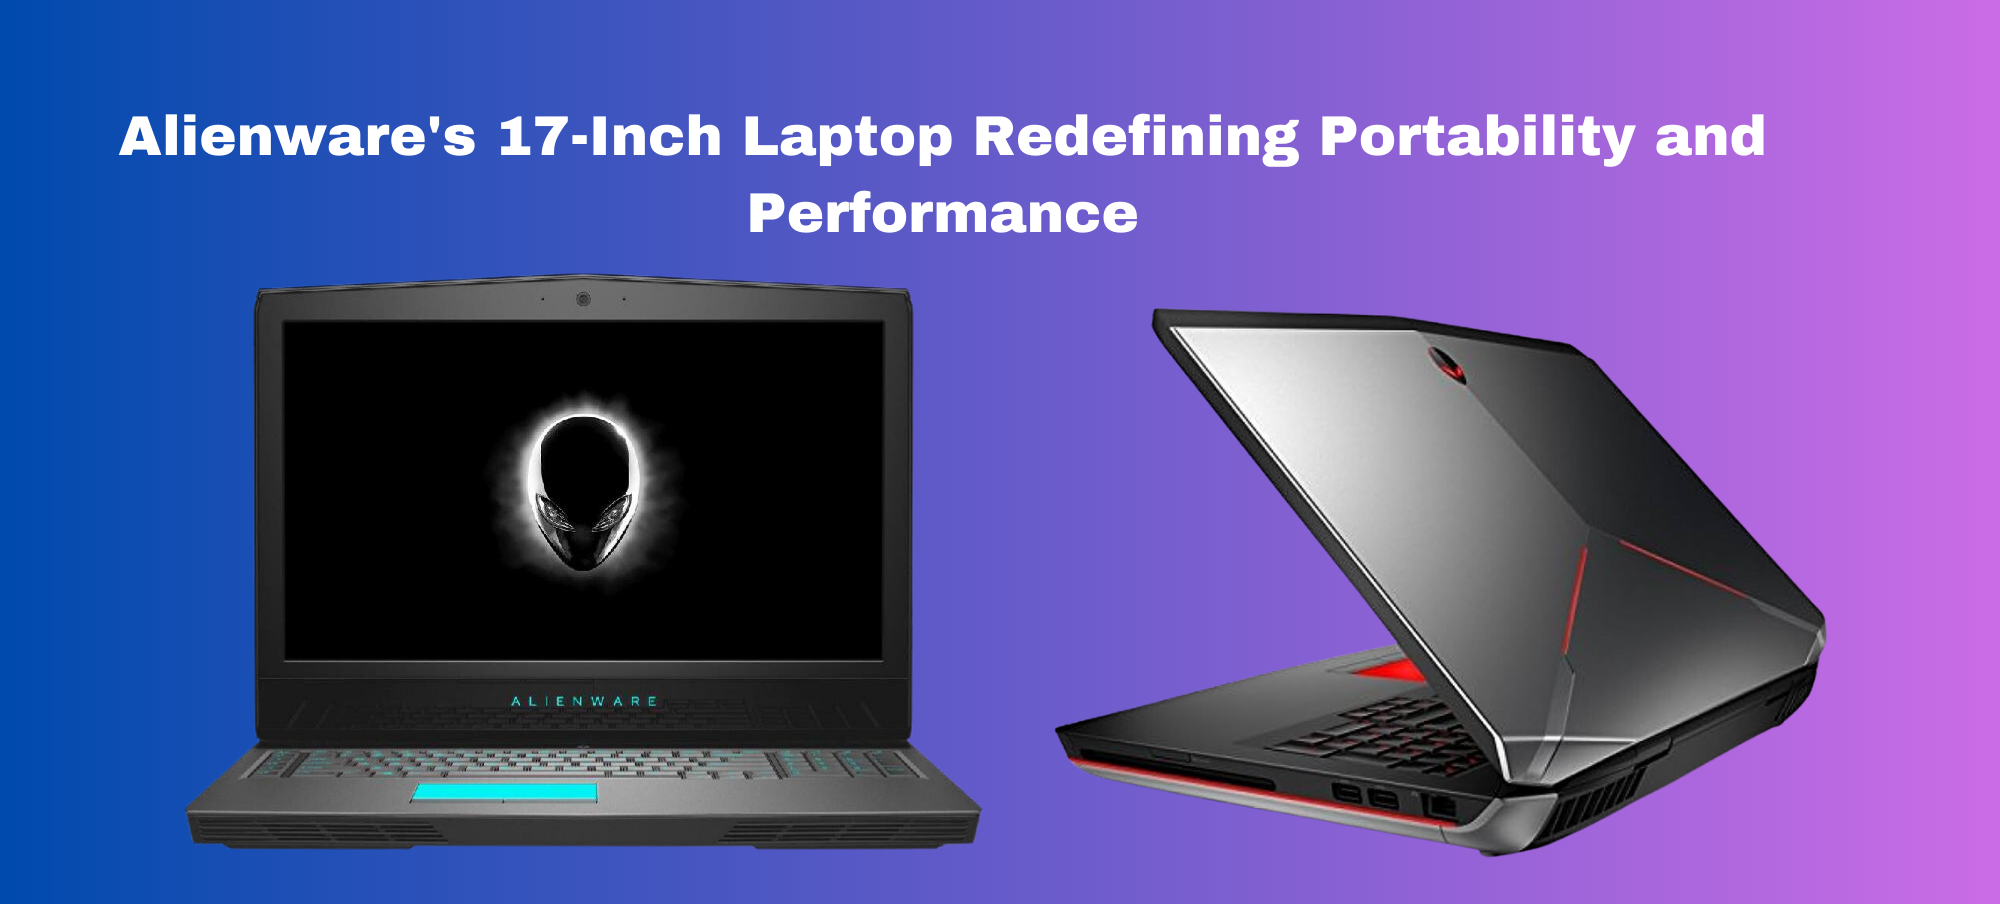 Alienware's 17-Inch Laptop Redefining Portability and Performance